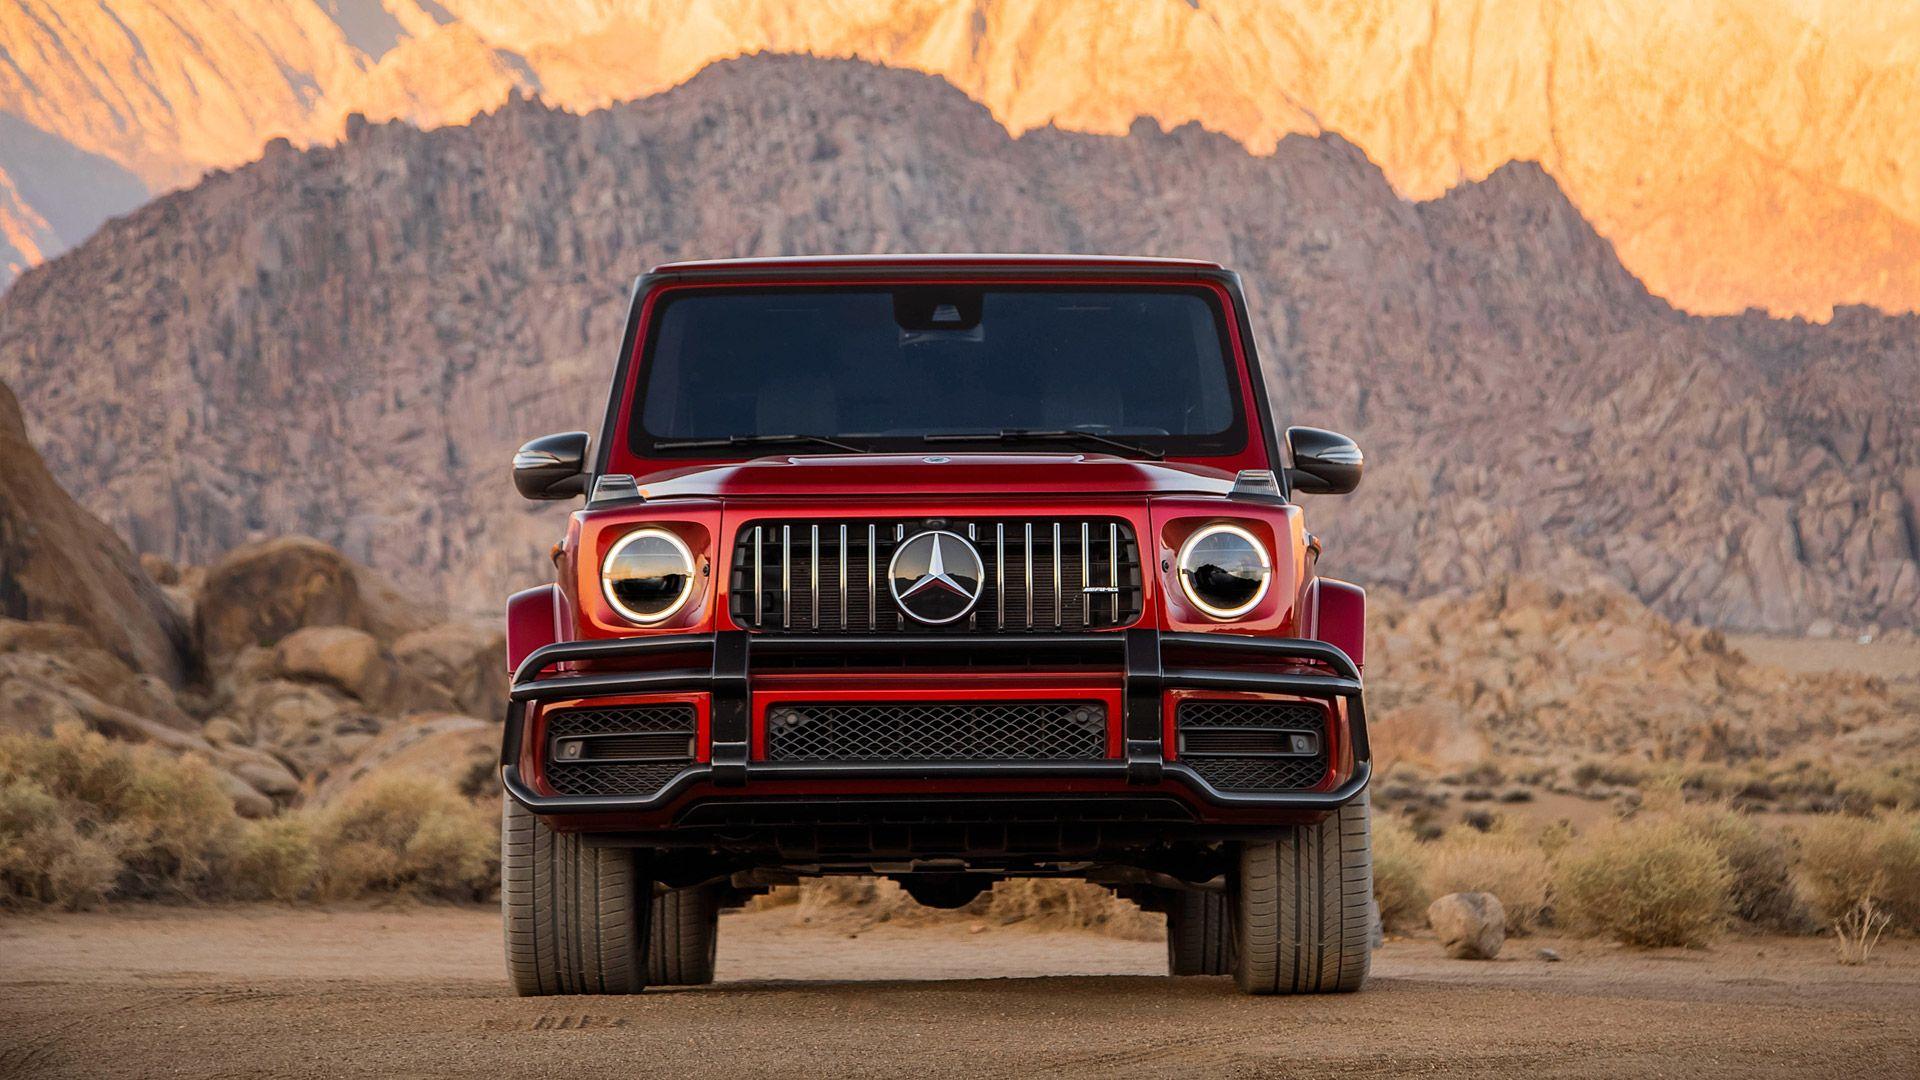 Mercedes Amg G63 Wallpapers Top Free Mercedes Amg G63